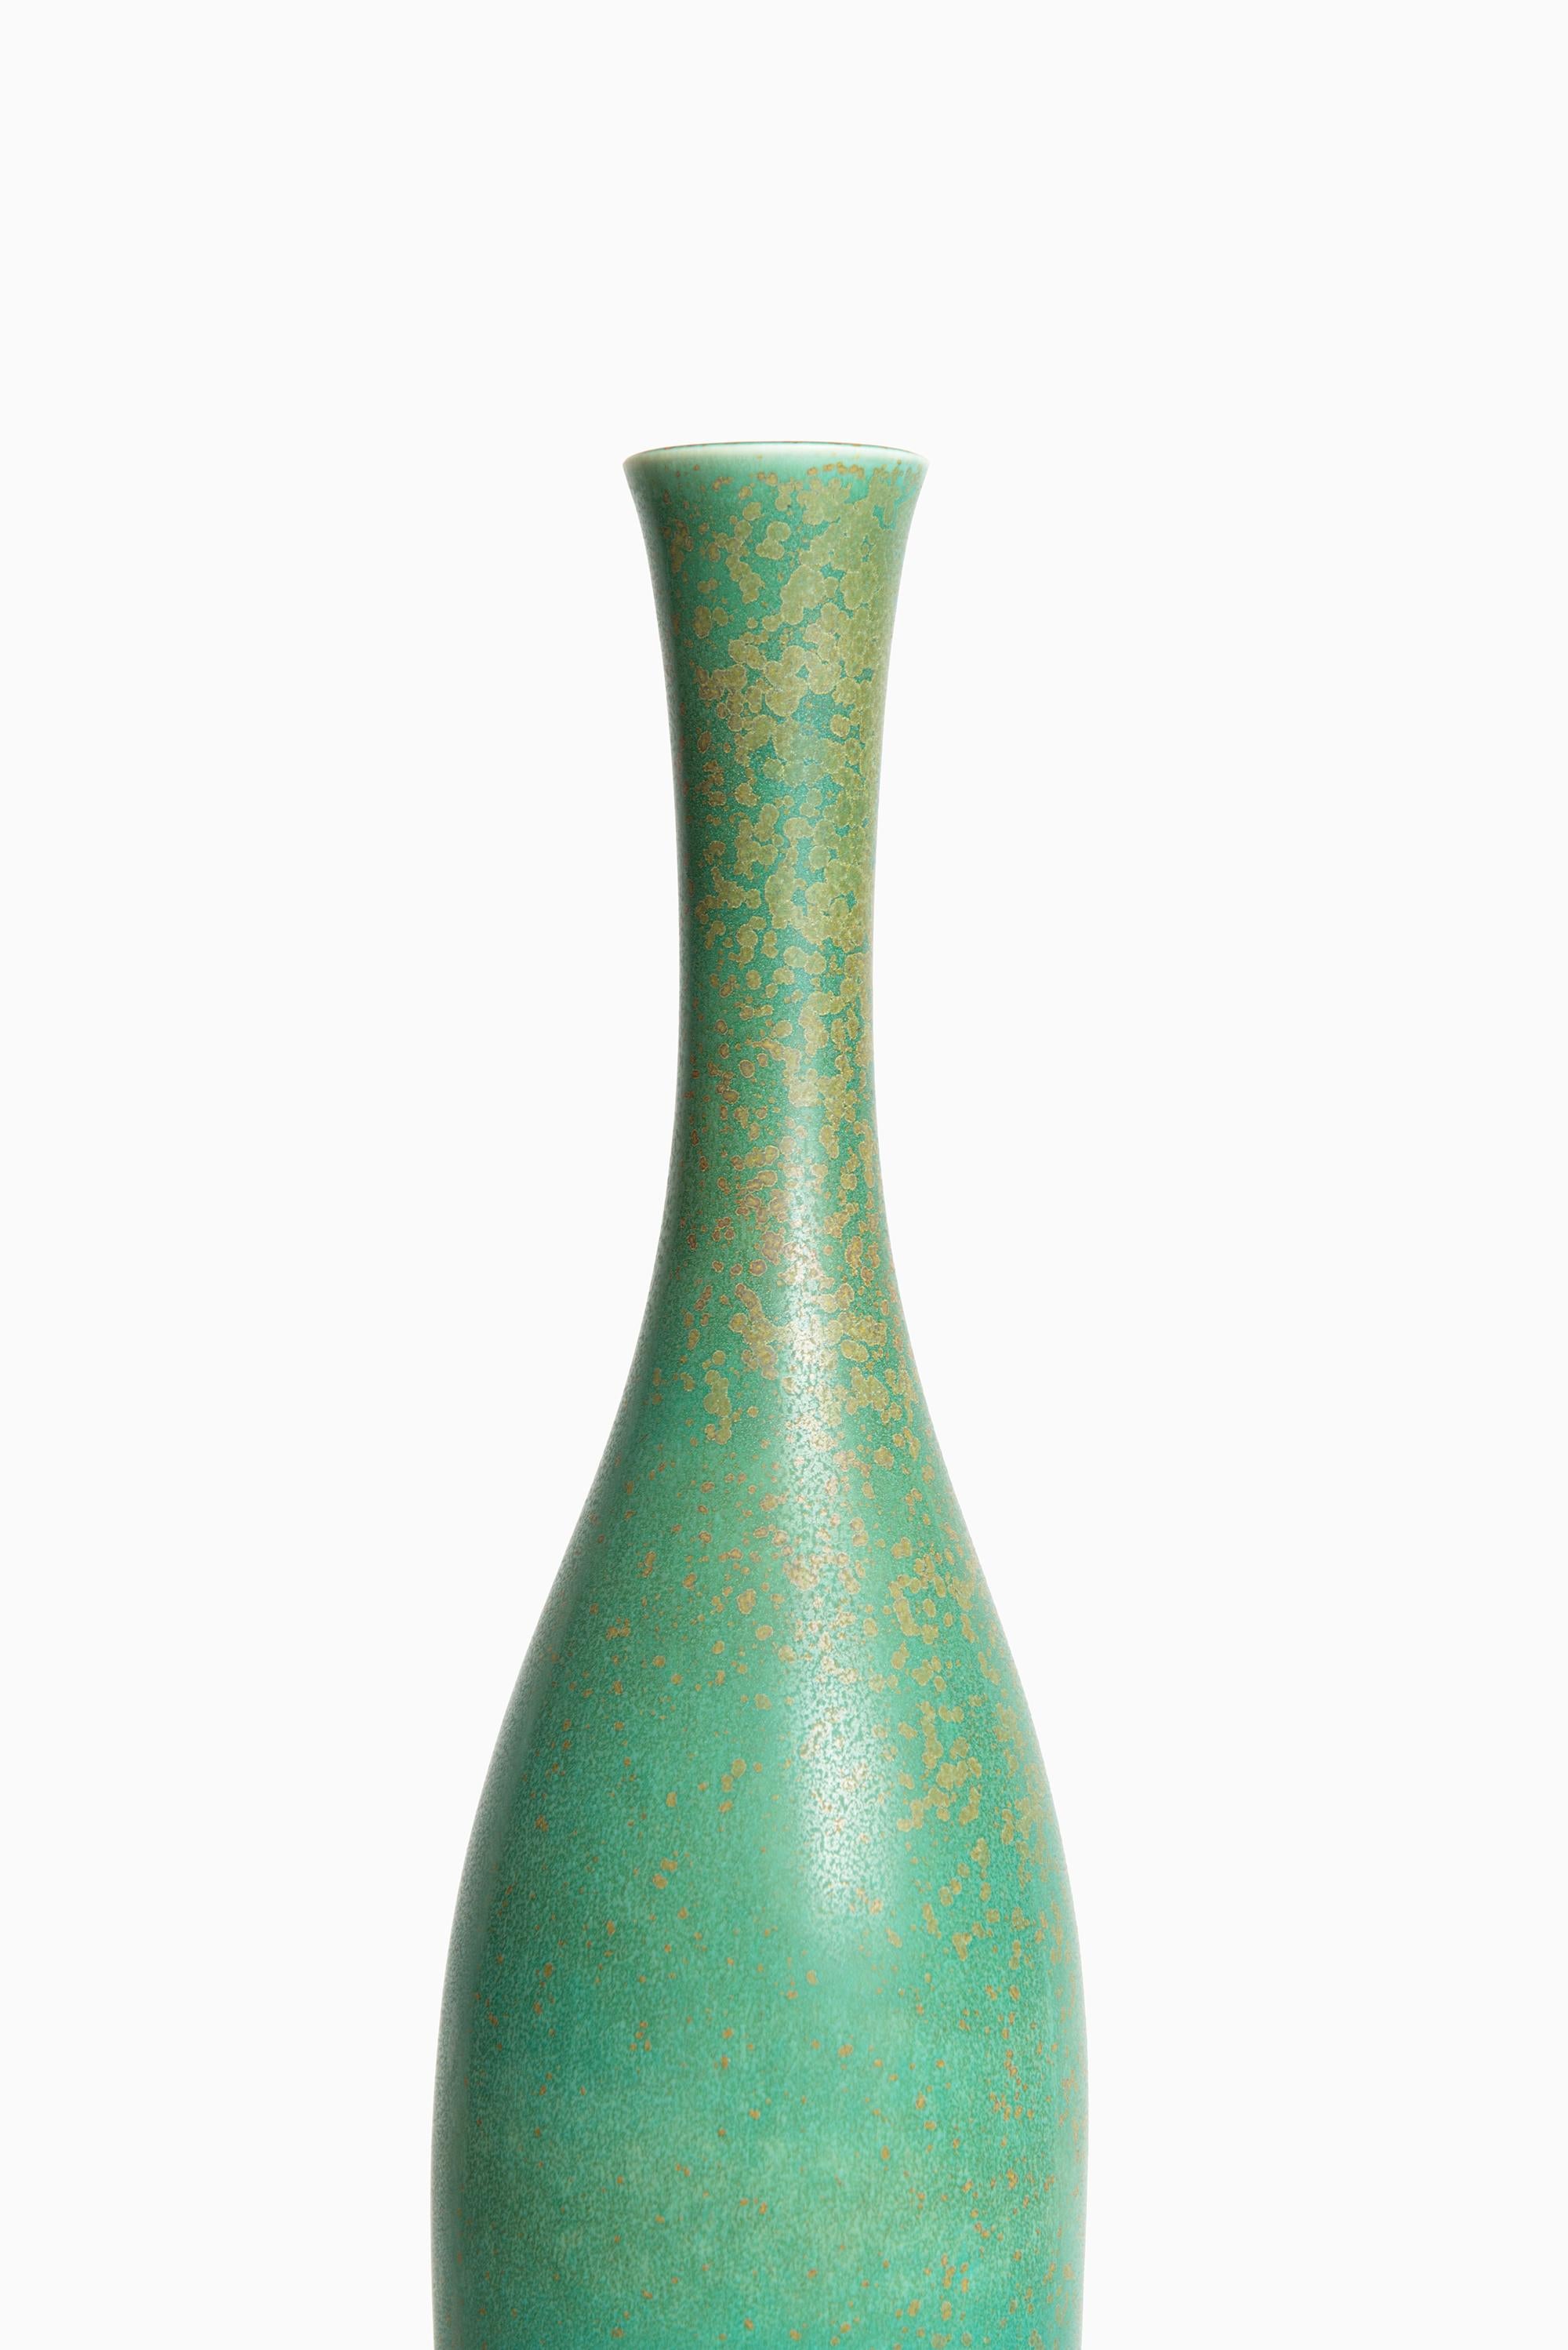 Rare and tall ceramic vase designed by Carl-Harry Stålhane. Produced by Rörstrand in Sweden.